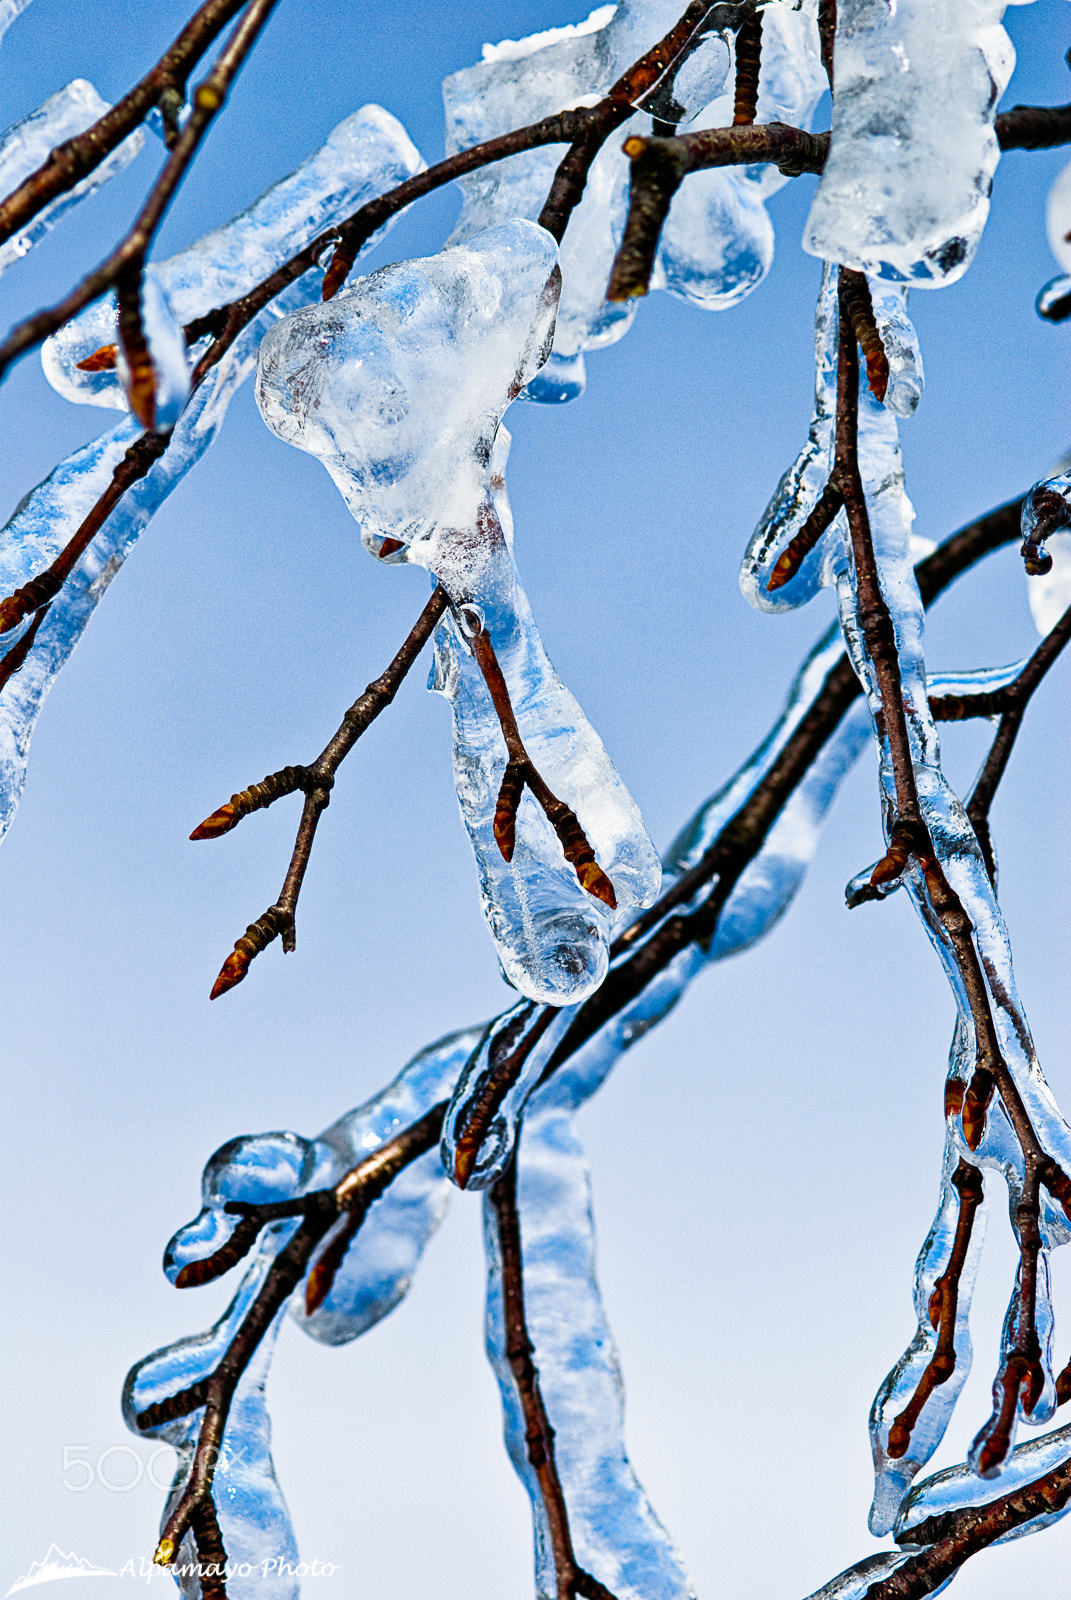 Nikon D200 + Nikon AF-S Micro-Nikkor 105mm F2.8G IF-ED VR sample photo. Frozen branches photography